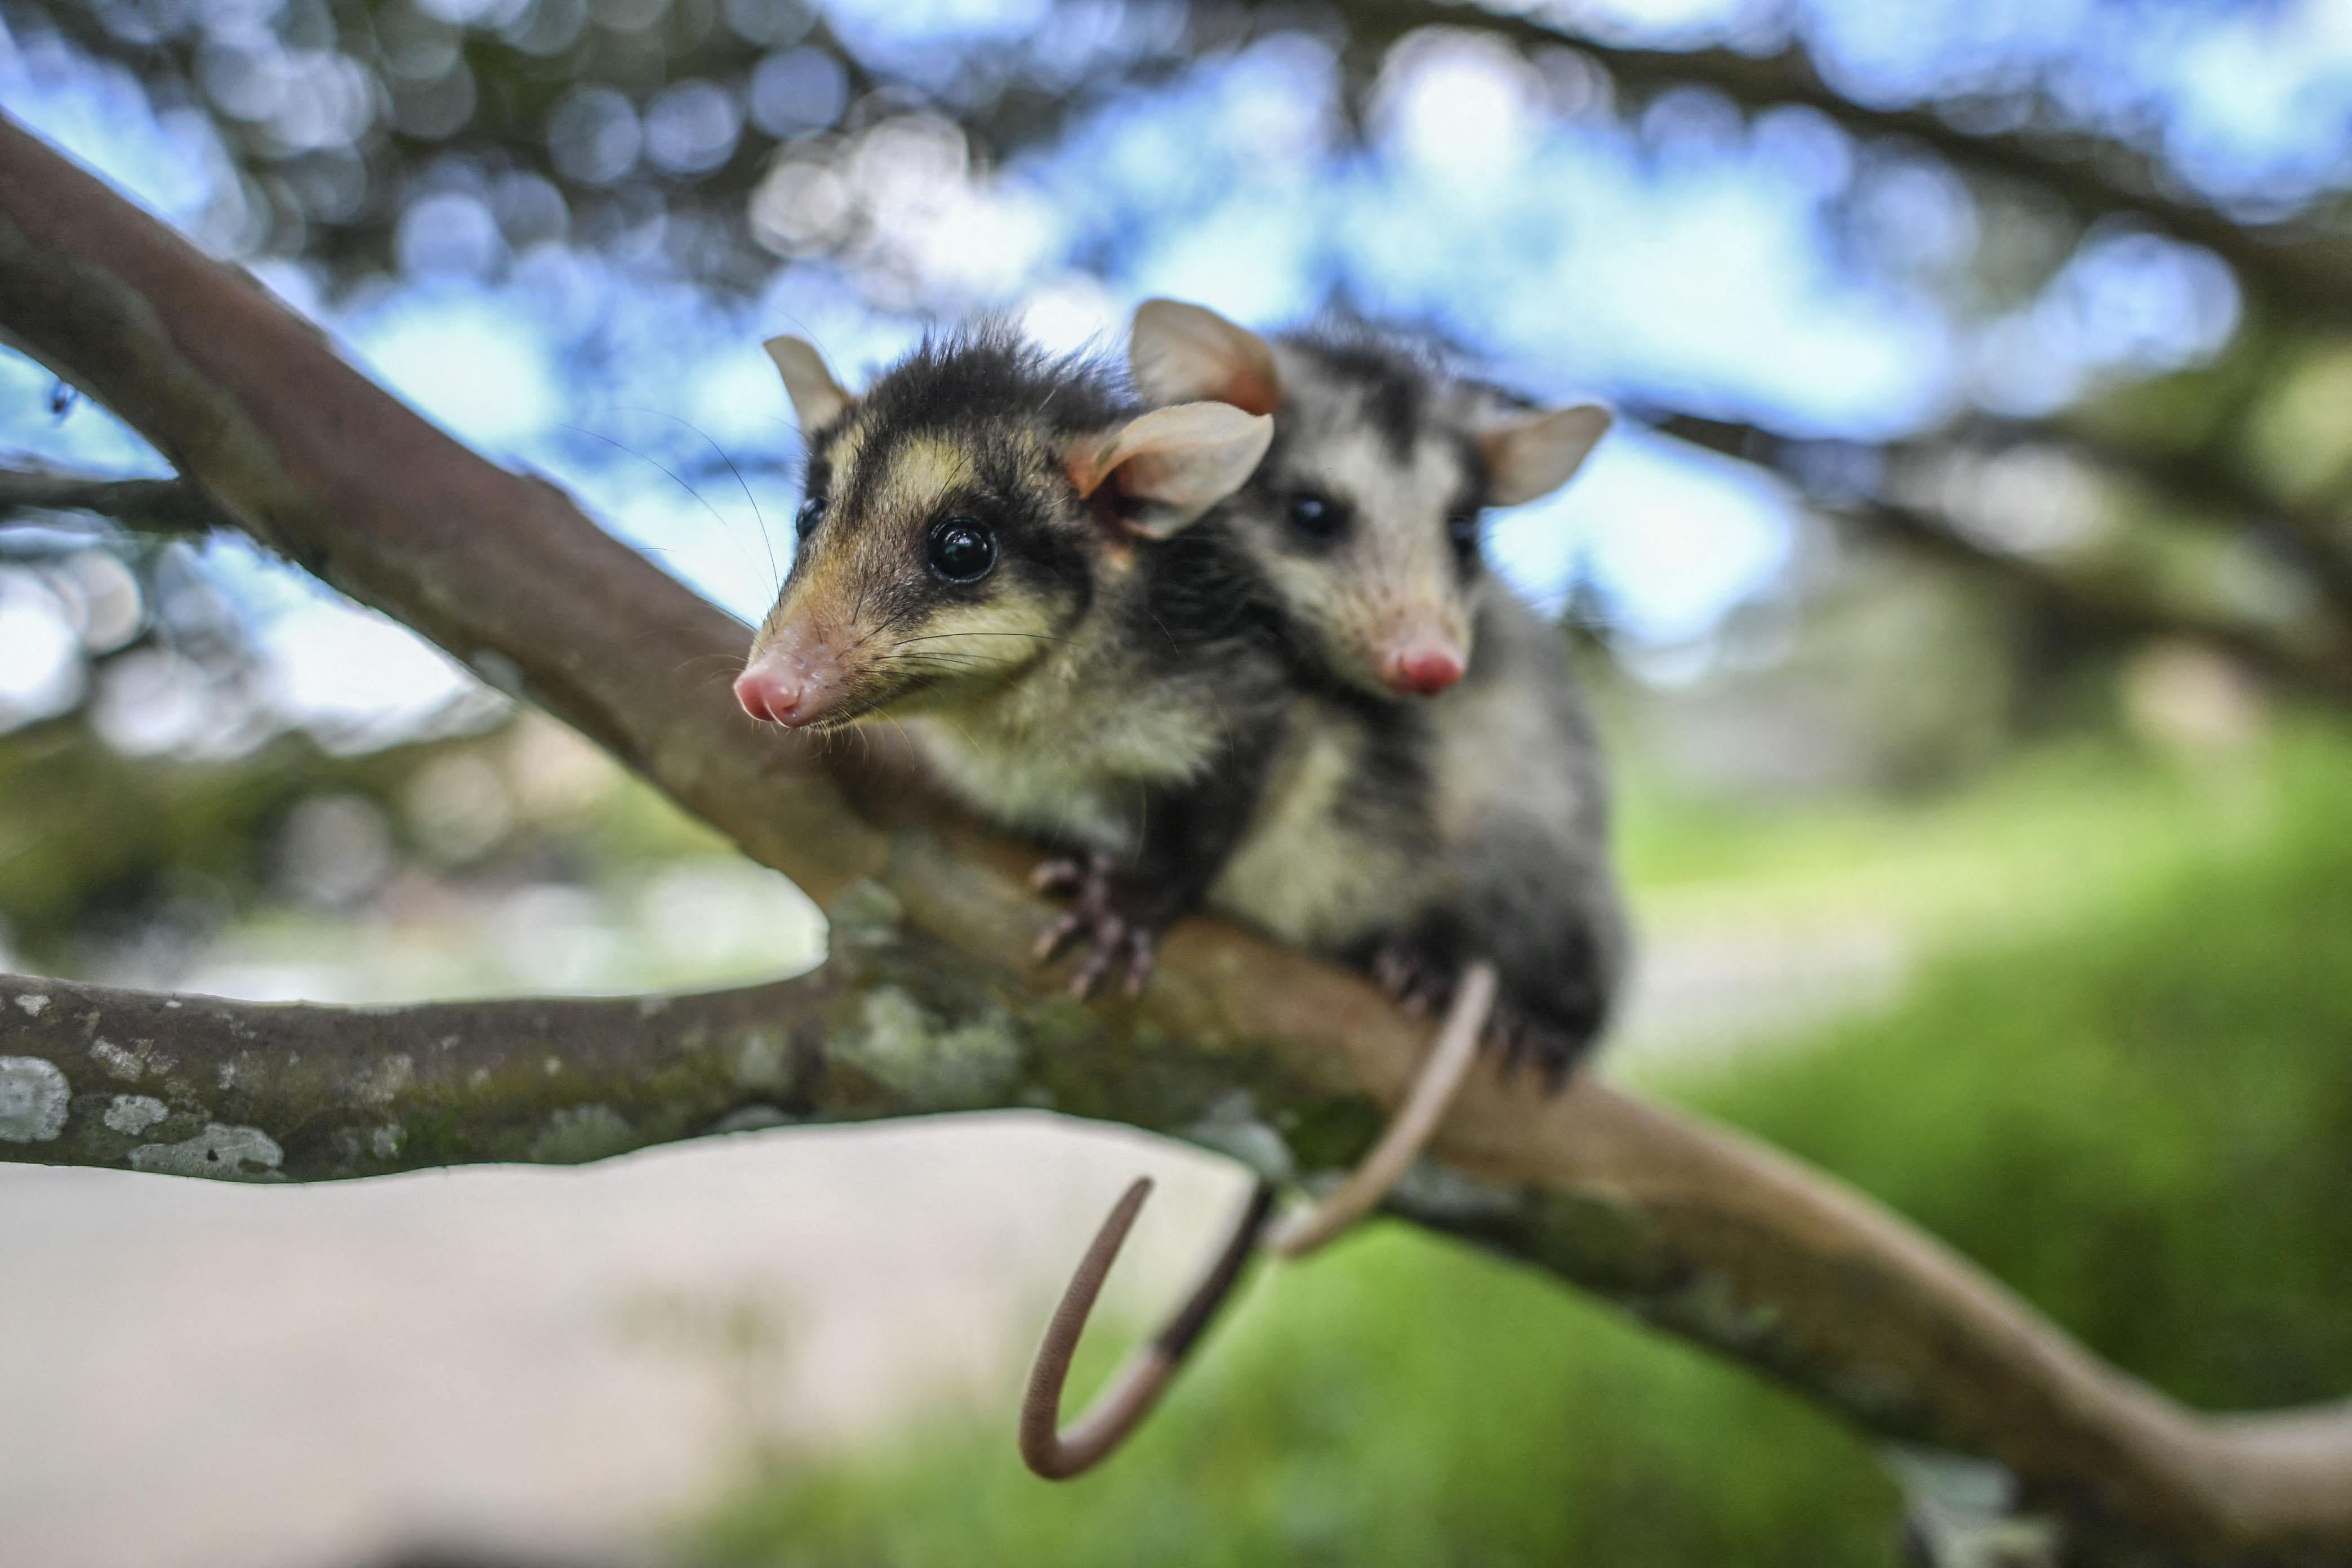 Two small opossums cling to each other while perched on a tree branch.